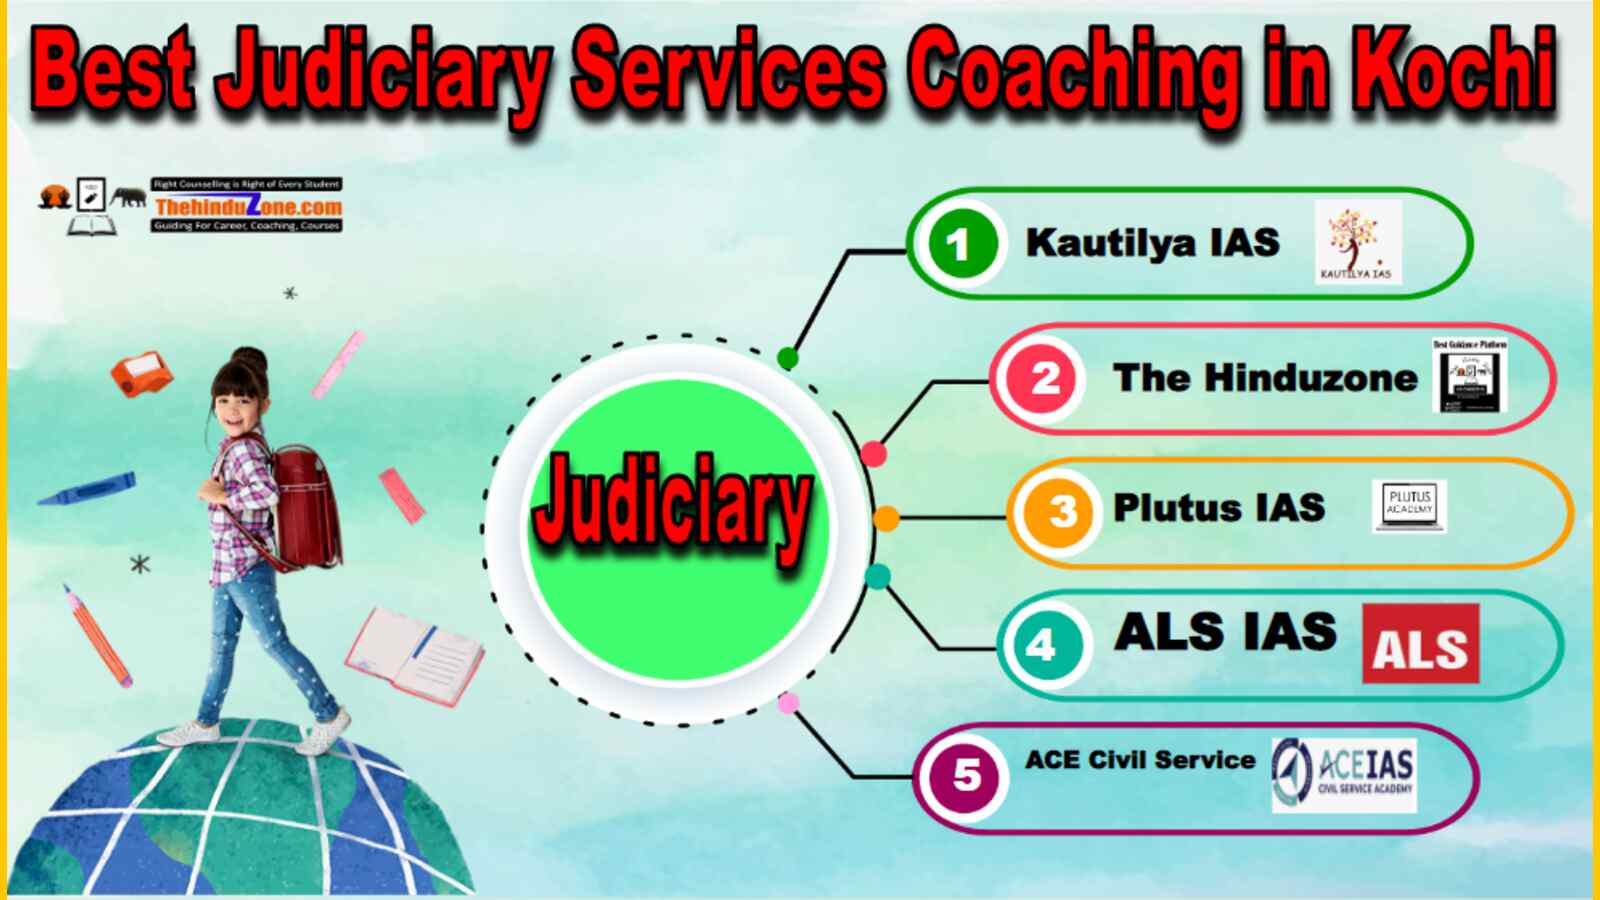 Best Judiciary Services Coaching in Kochi